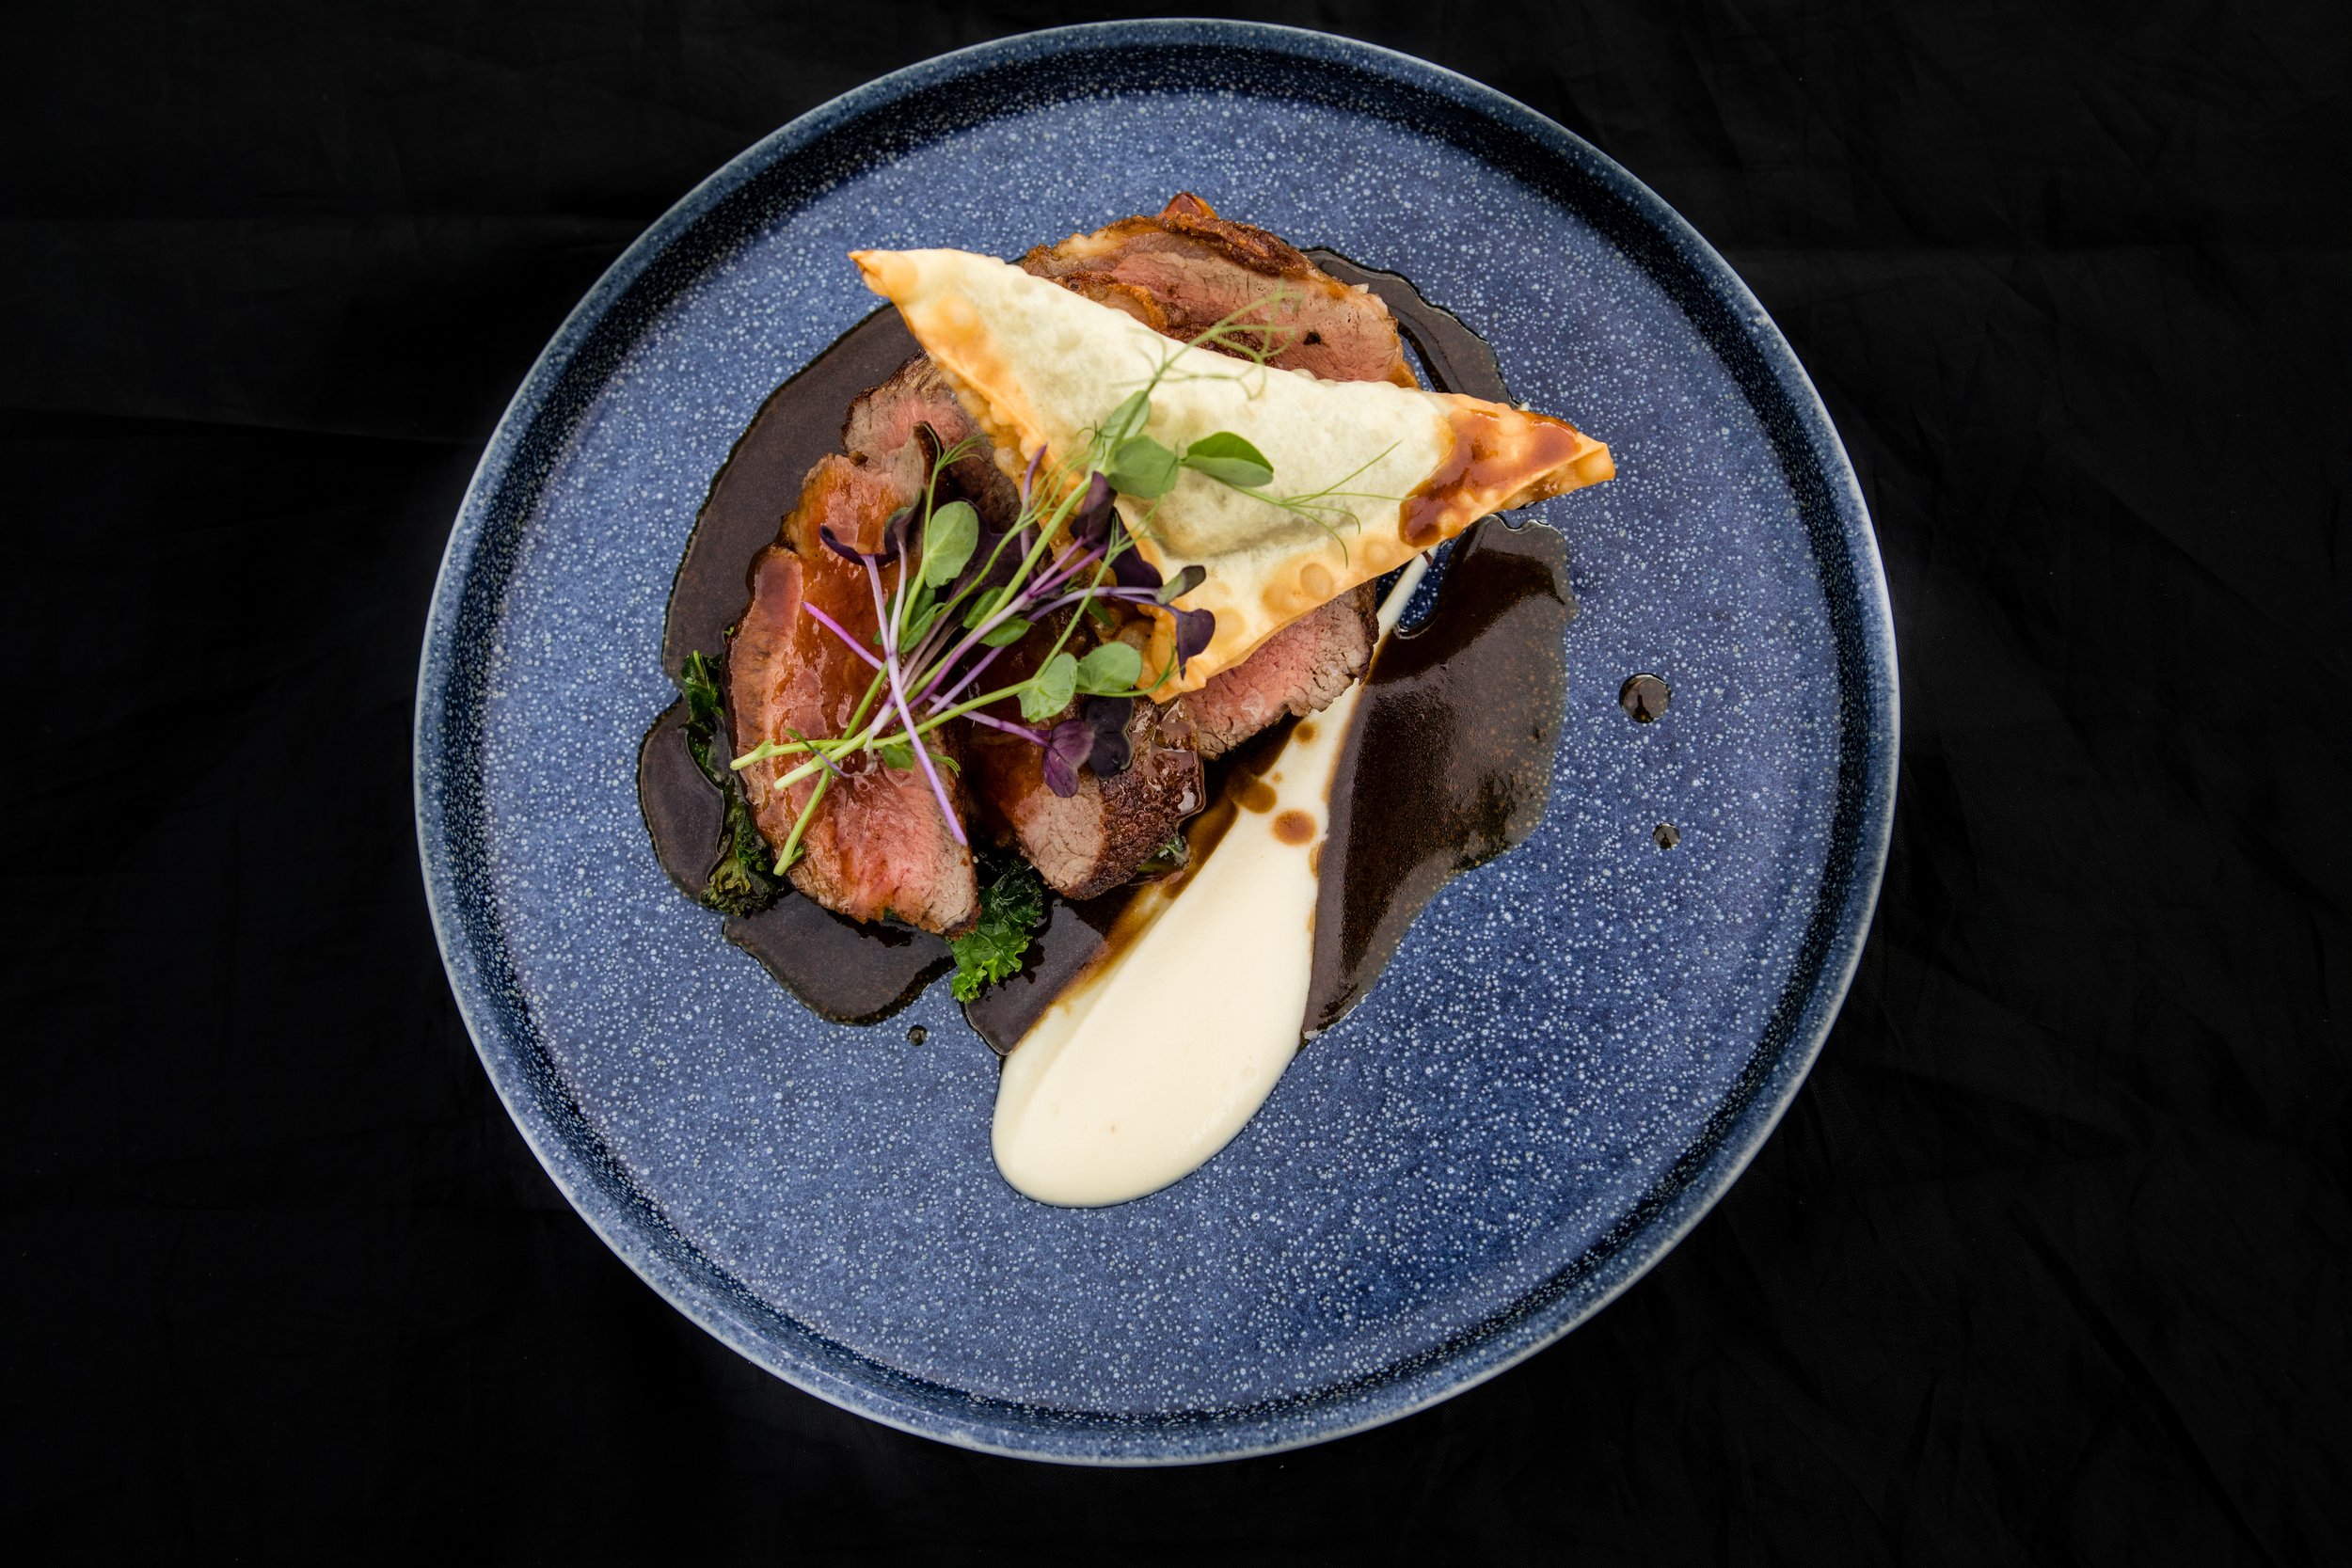 Cameron Davies - 55 Day Aged Pure South Hand Picked Beef Sirloin with Braised Beef Rib Wonton